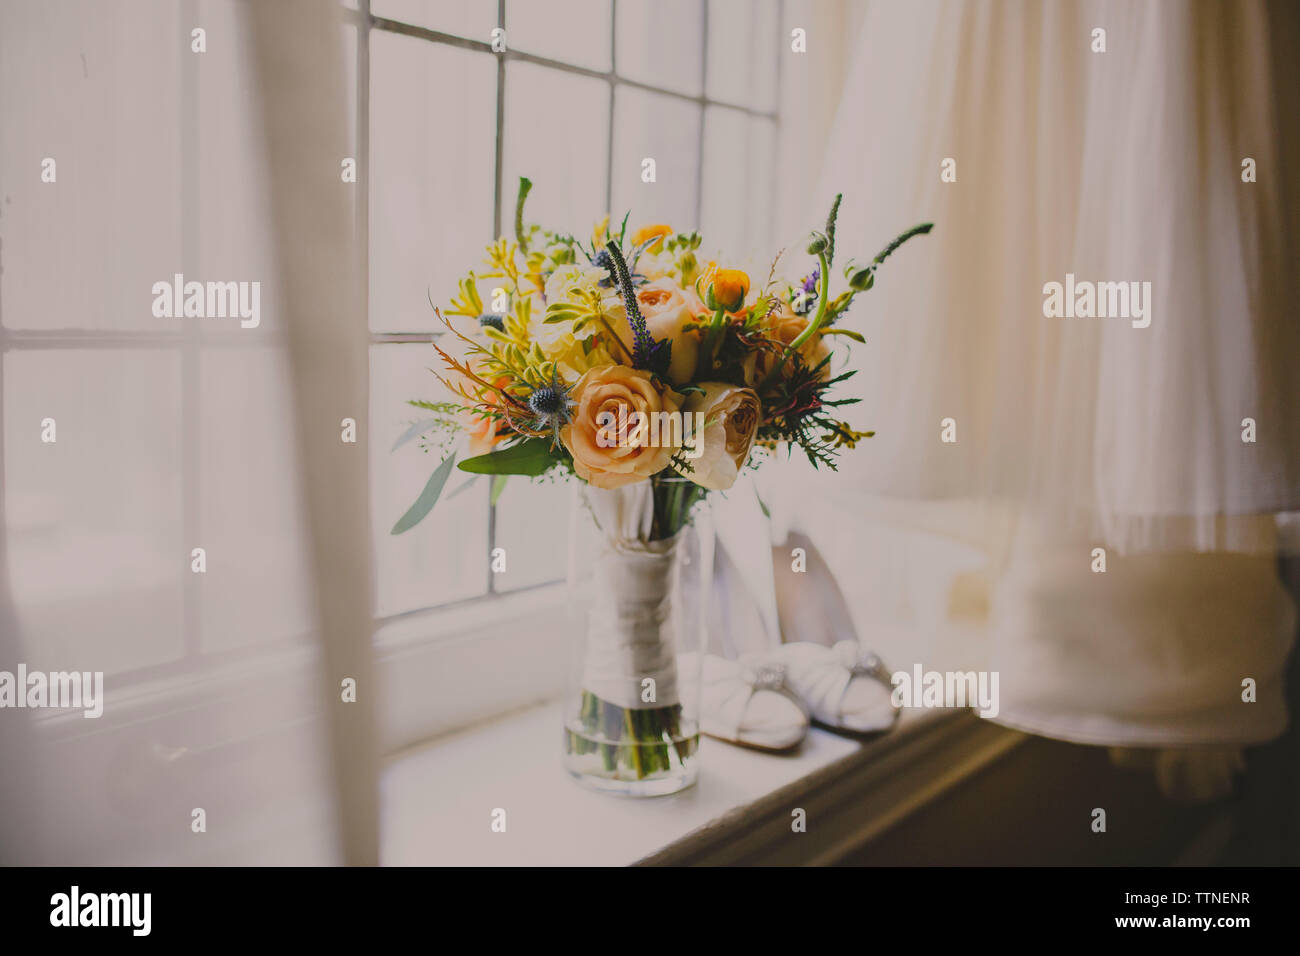 Flower vase and shoes on window sill by wedding dress Stock Photo